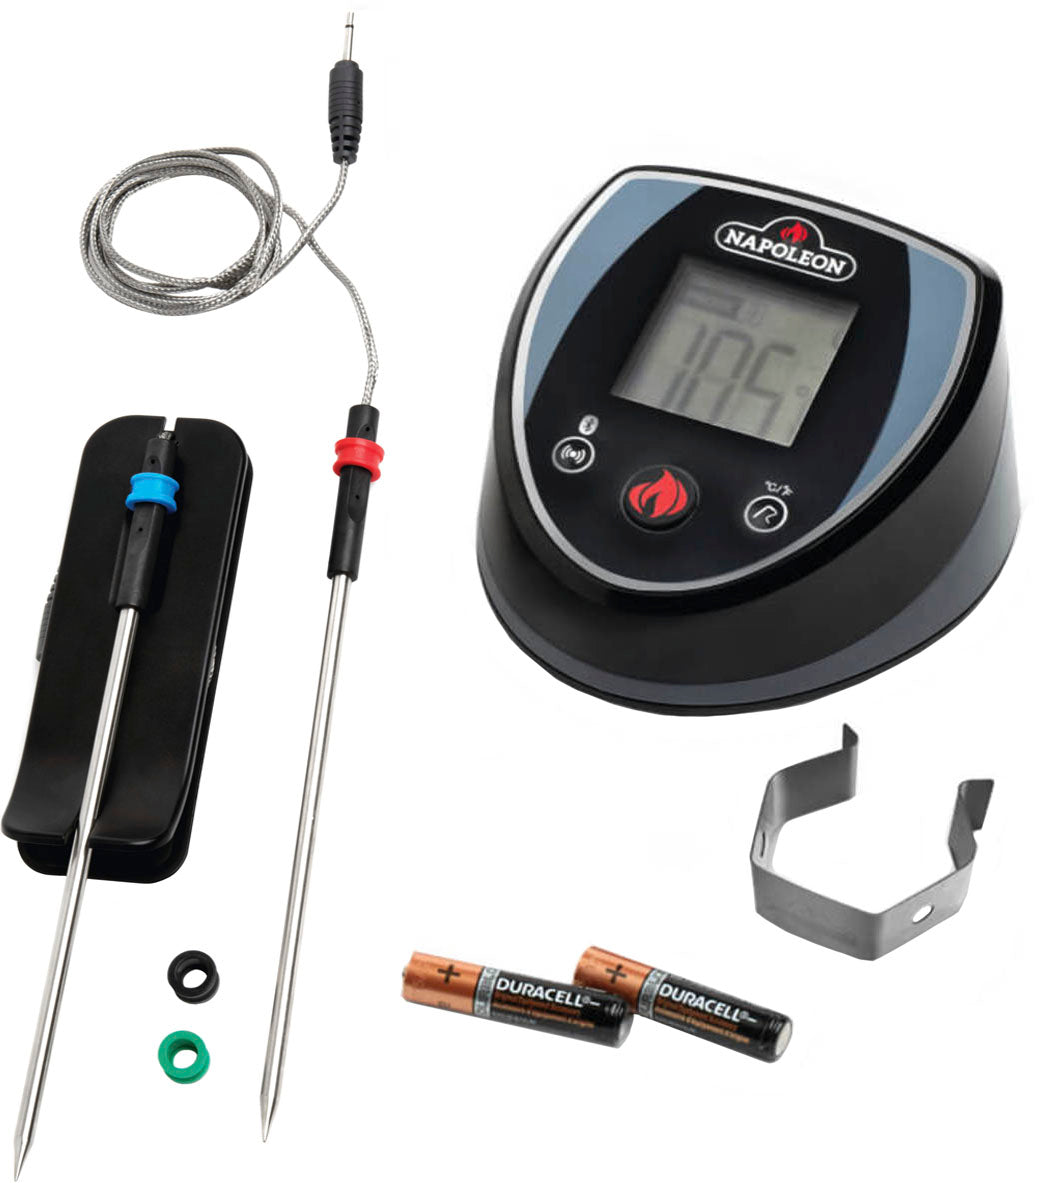 Napoleon - ACCU-PROBE Bluetooth Enabled Thermometer - Black and Grey_5